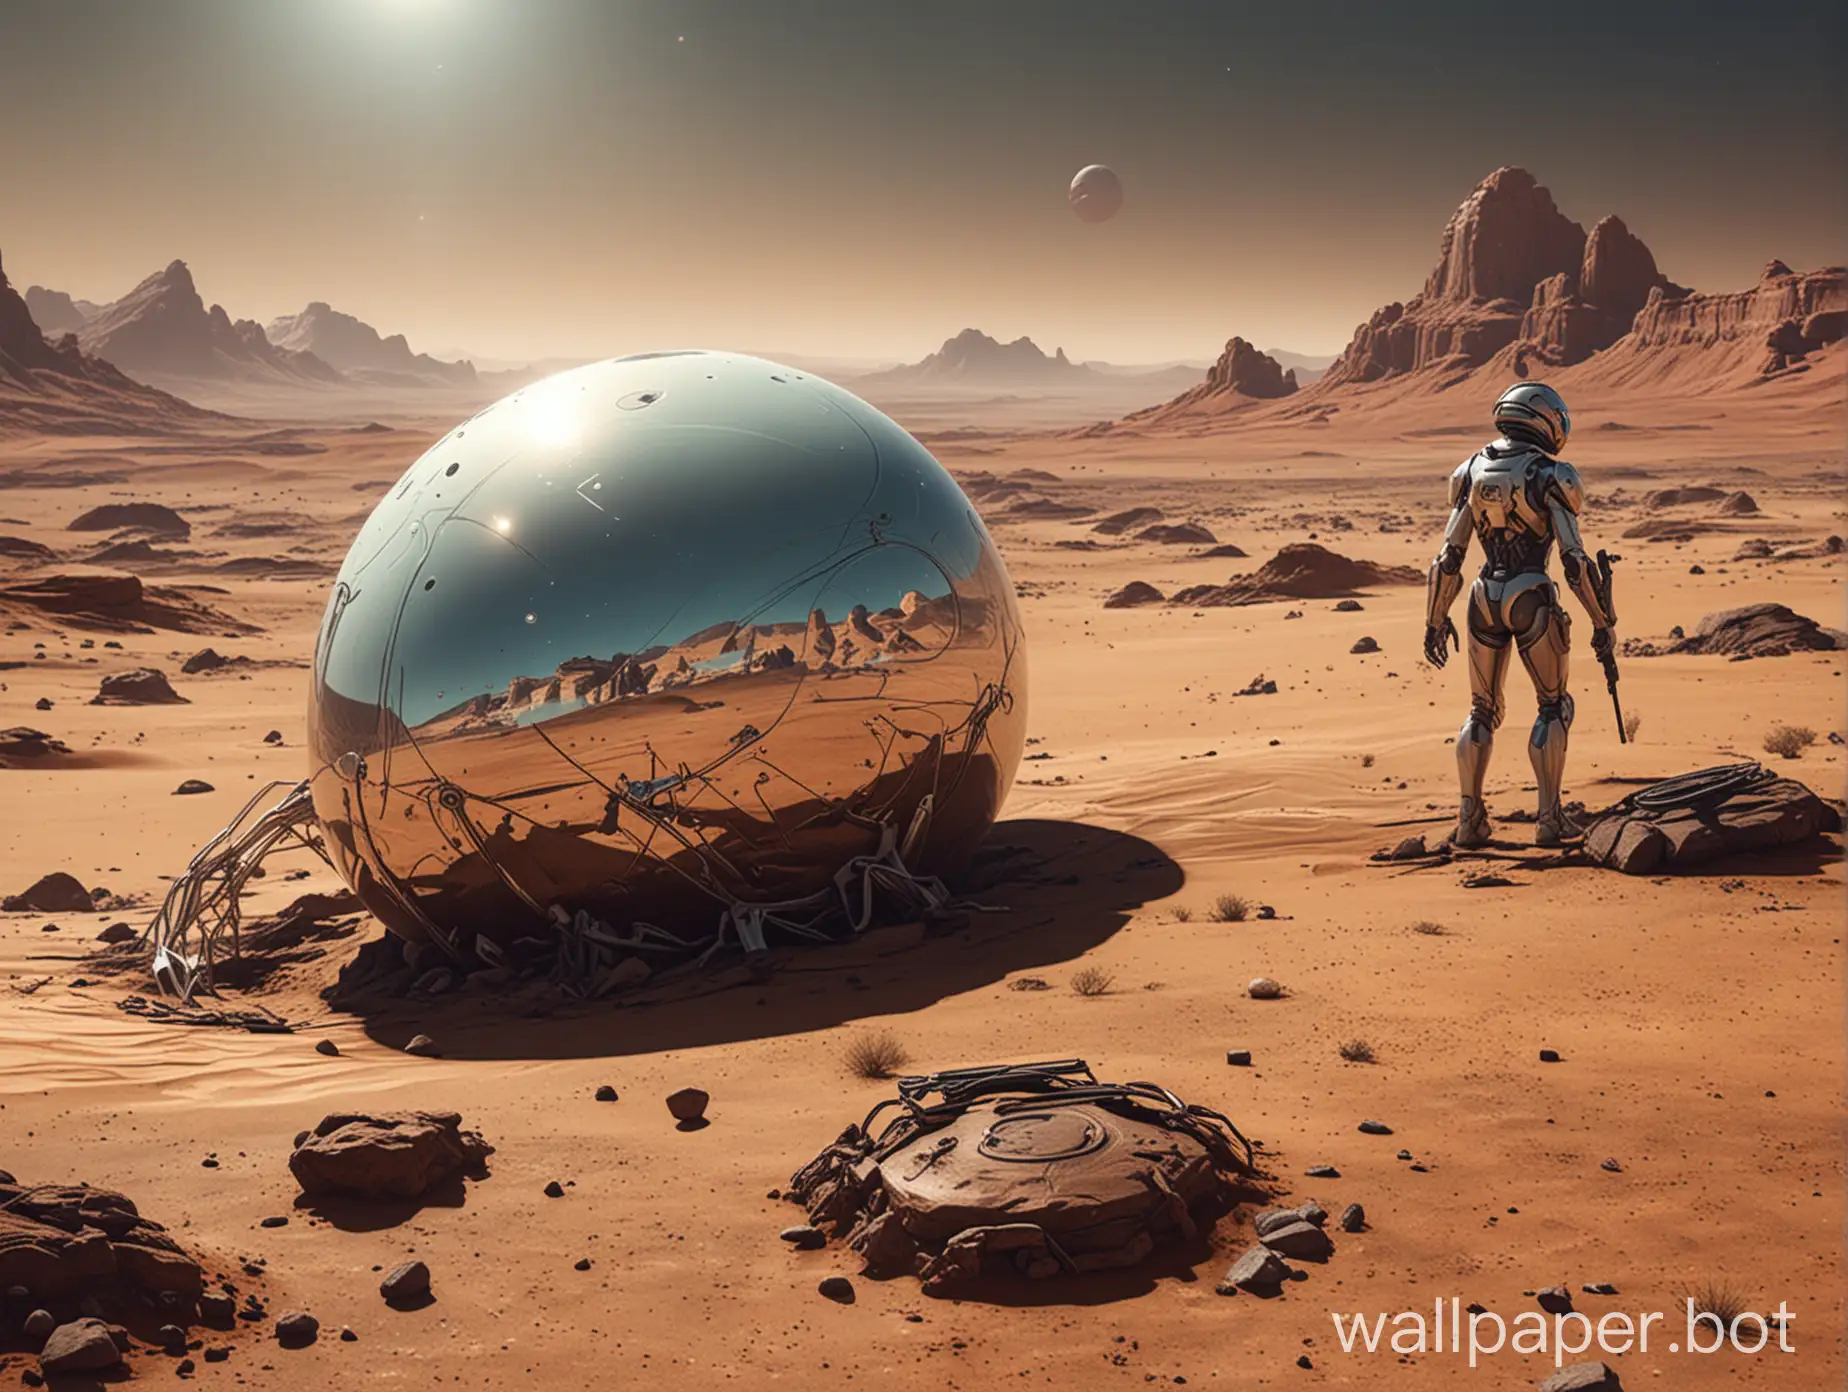 Exploring-the-Futuristic-Landscape-of-Cyberspoon-on-a-Distant-Planet